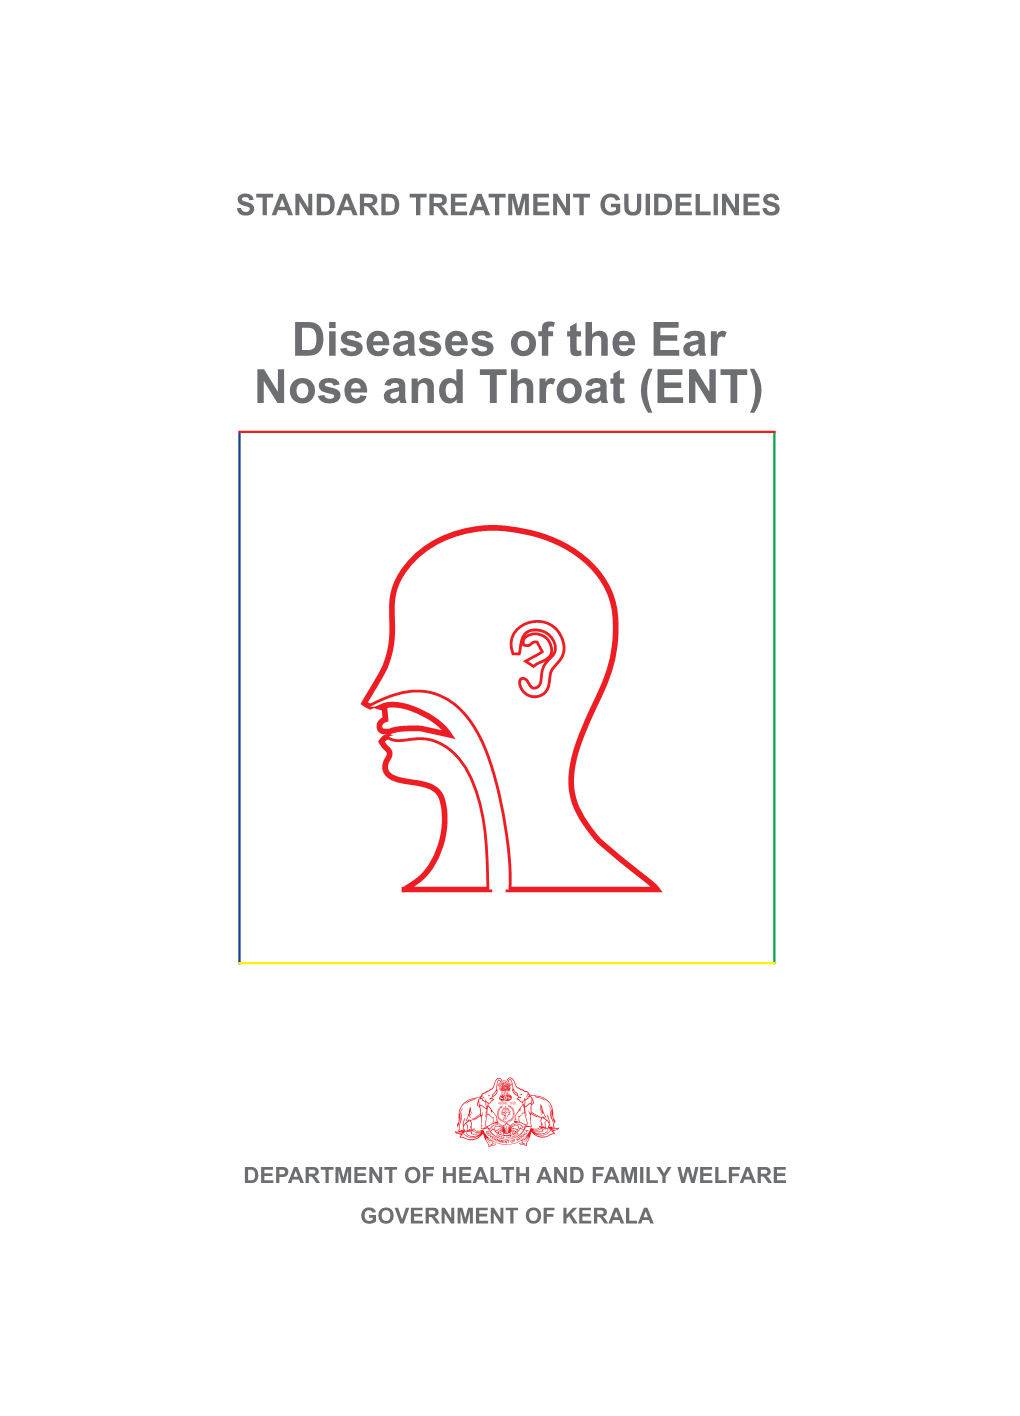 Diseases of the Ear Nose and Throat (ENT)